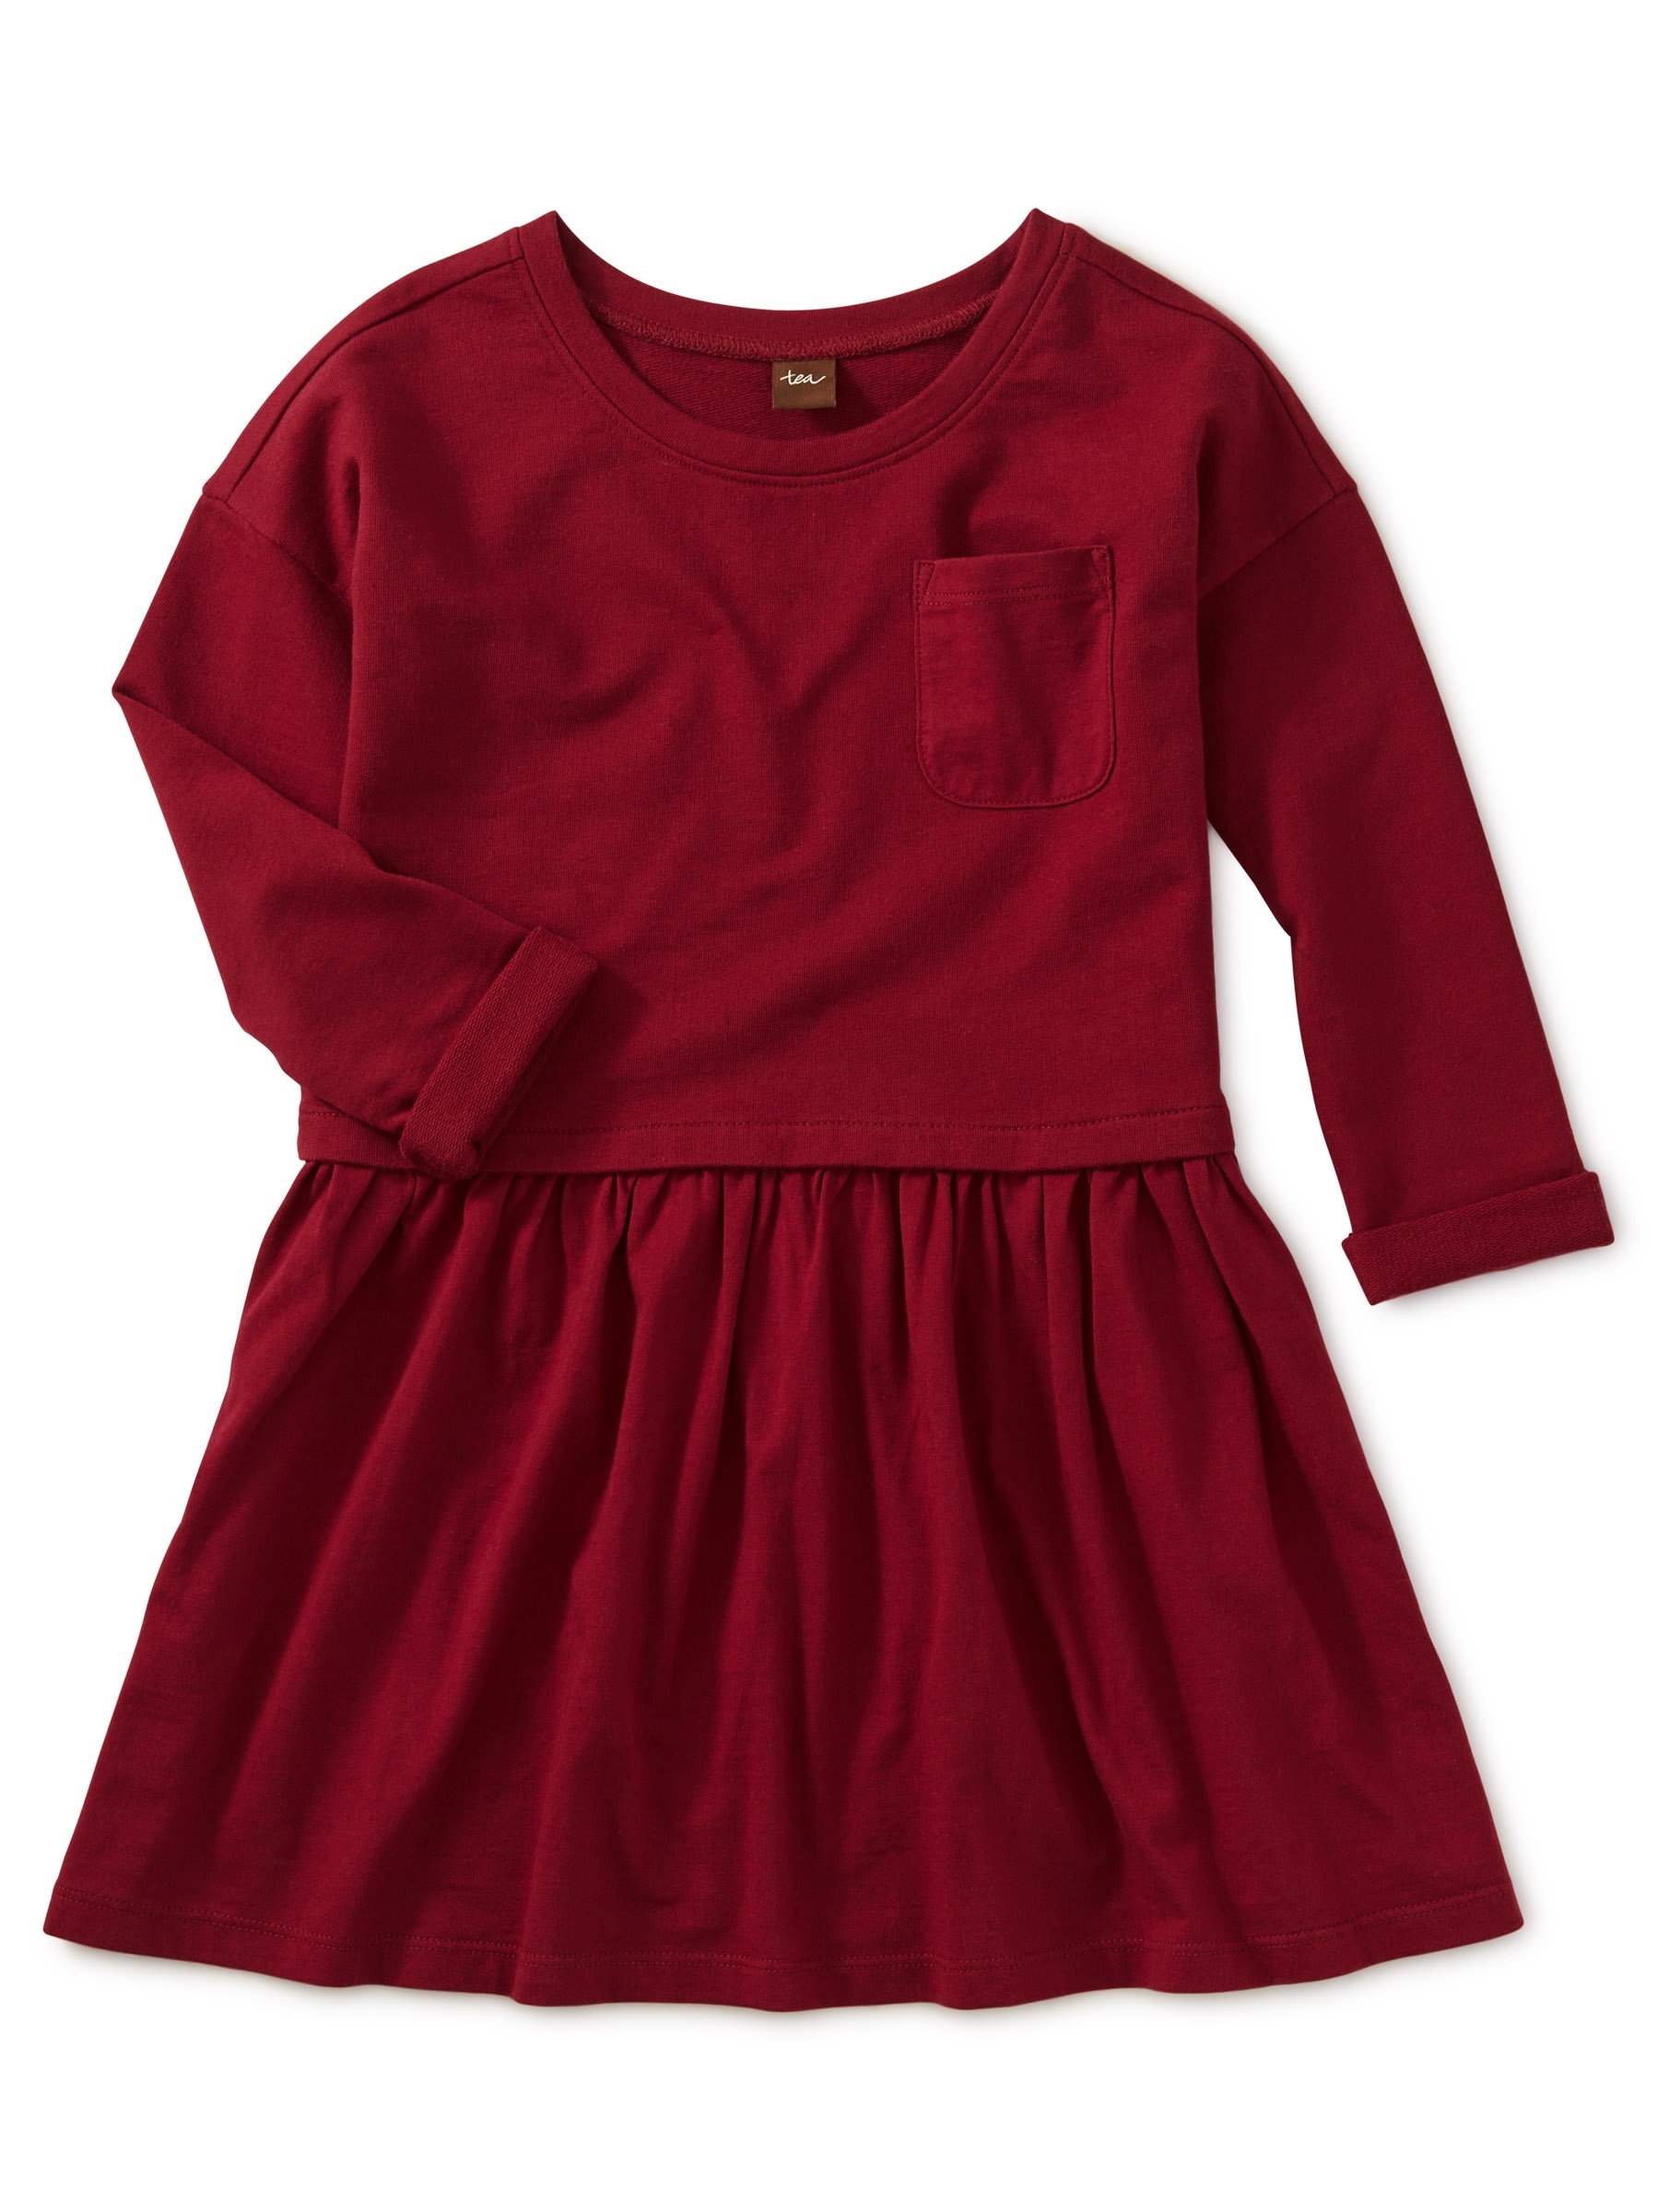 Solid Pocket Play Dress | Tea Collection